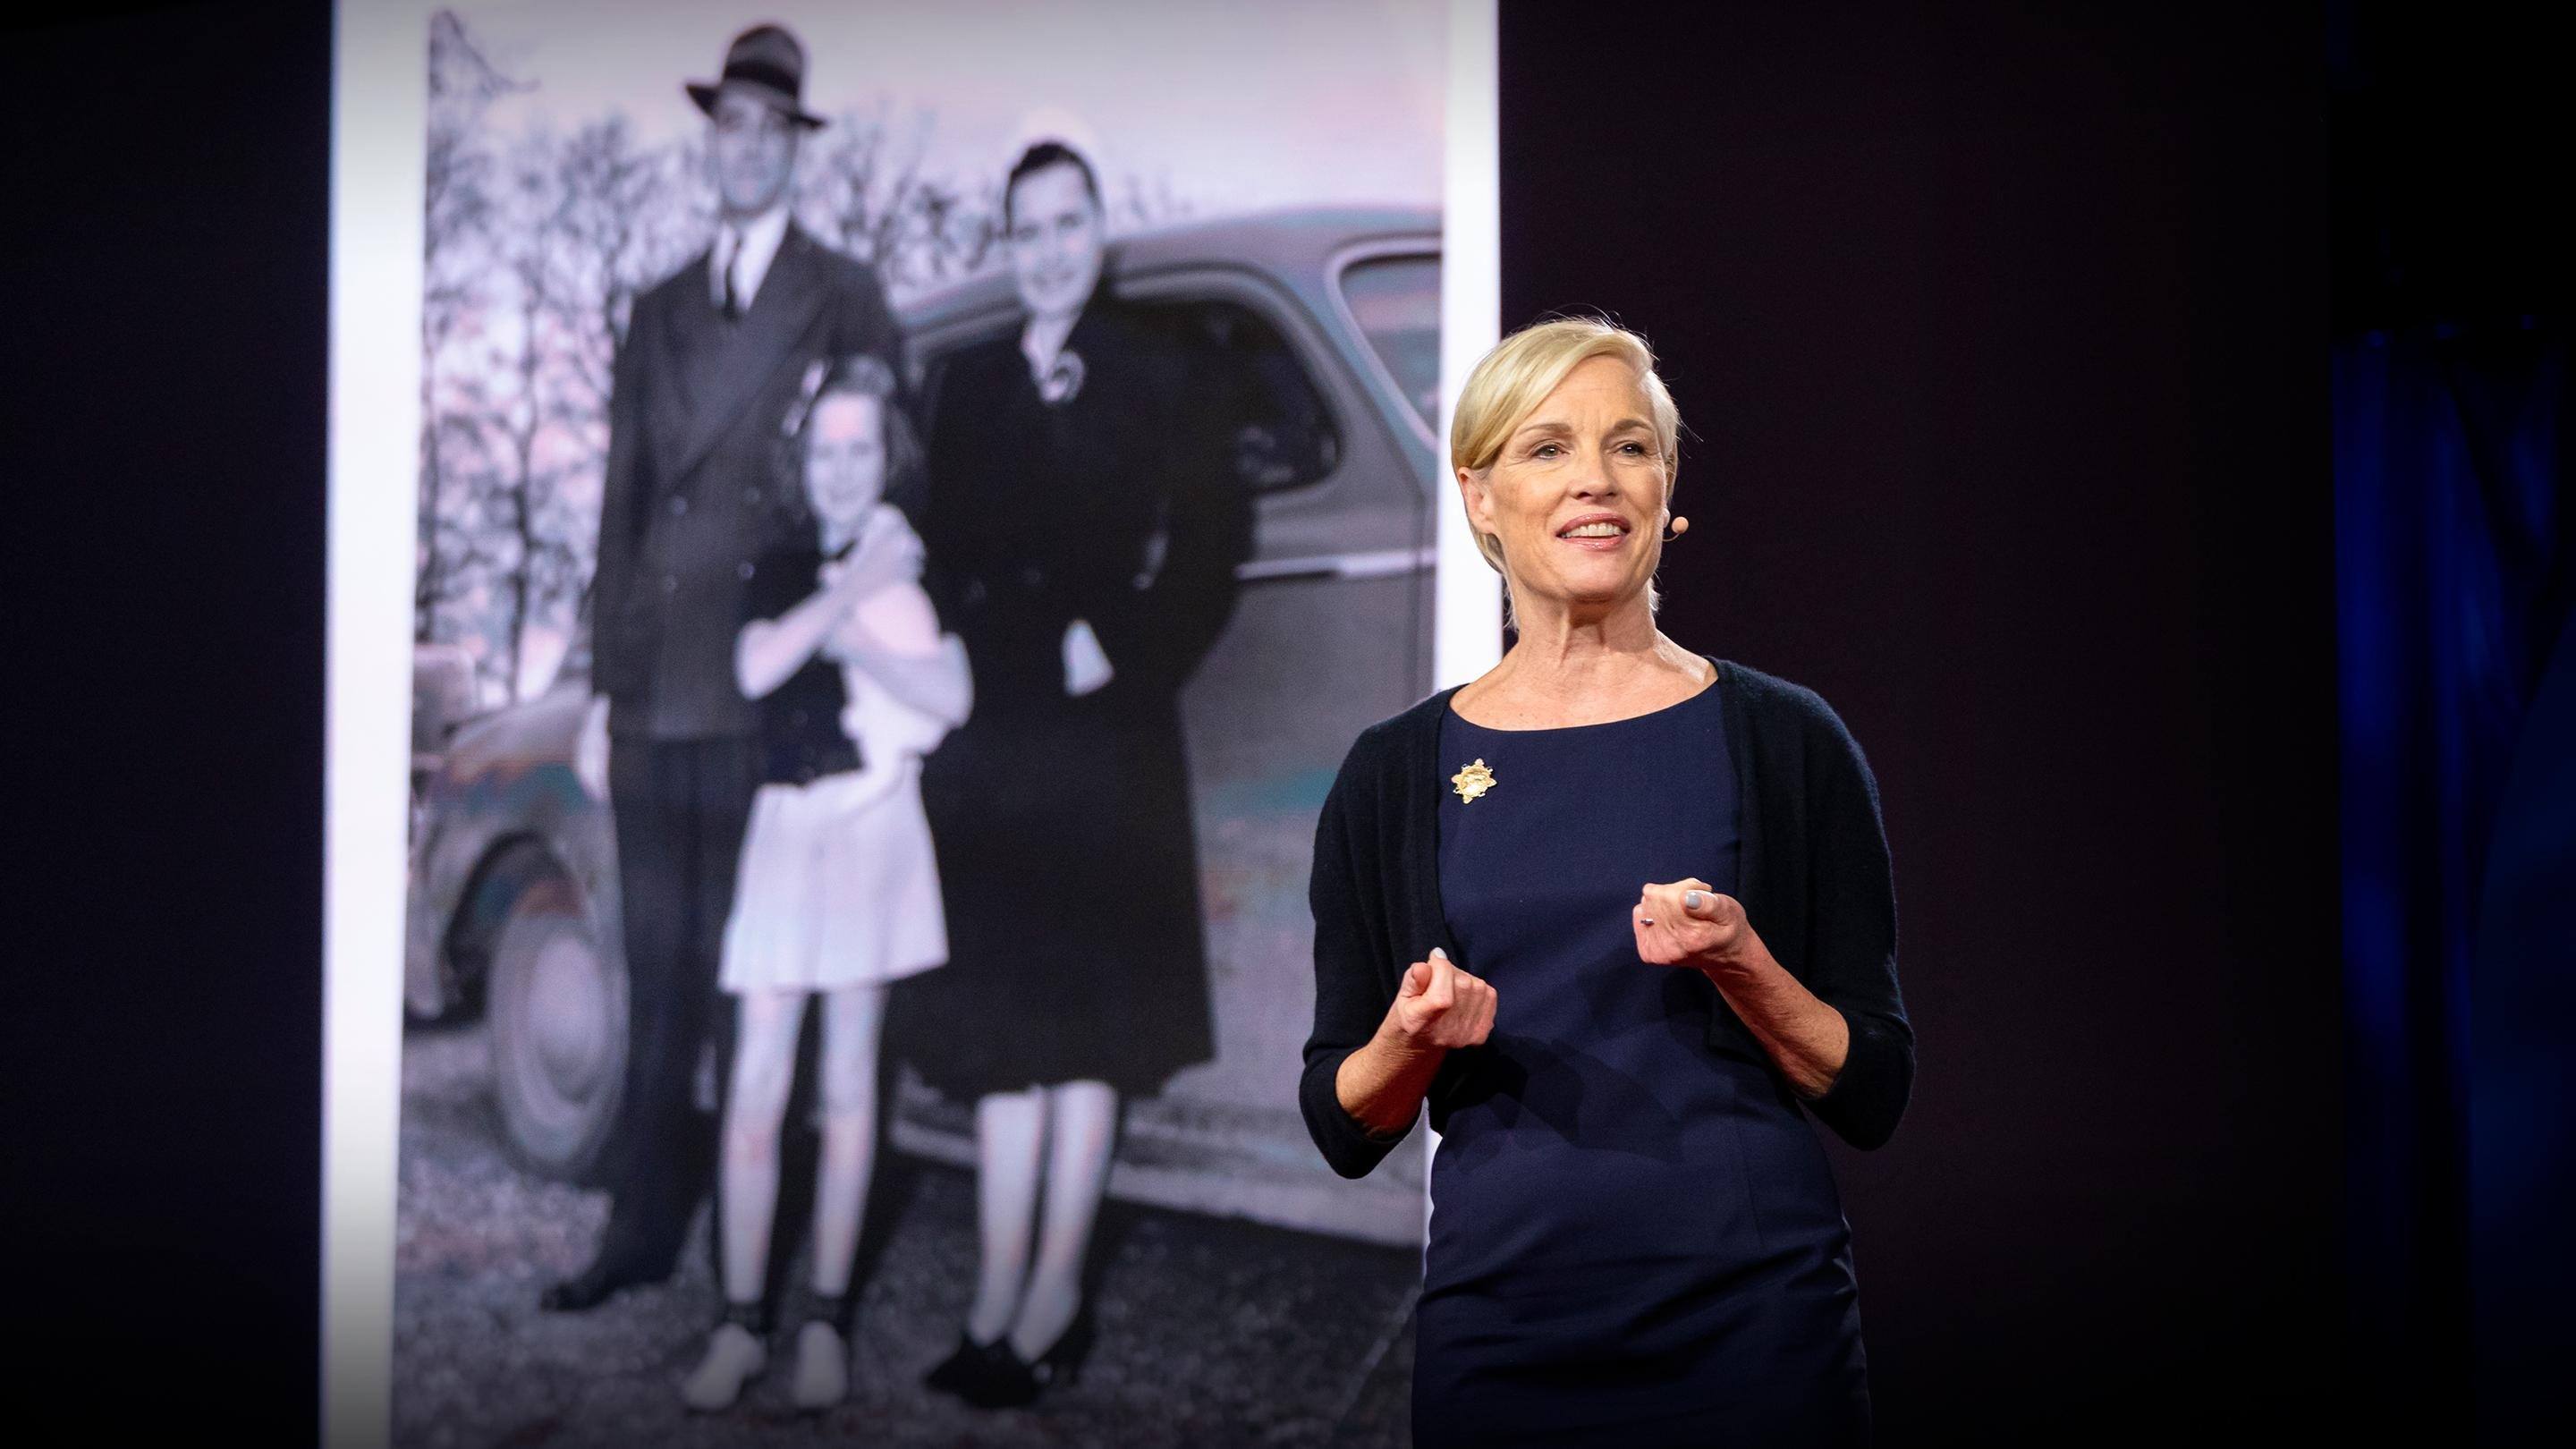 An idea from TED by Cecile Richards entitled The political progress women have made -- and what's next